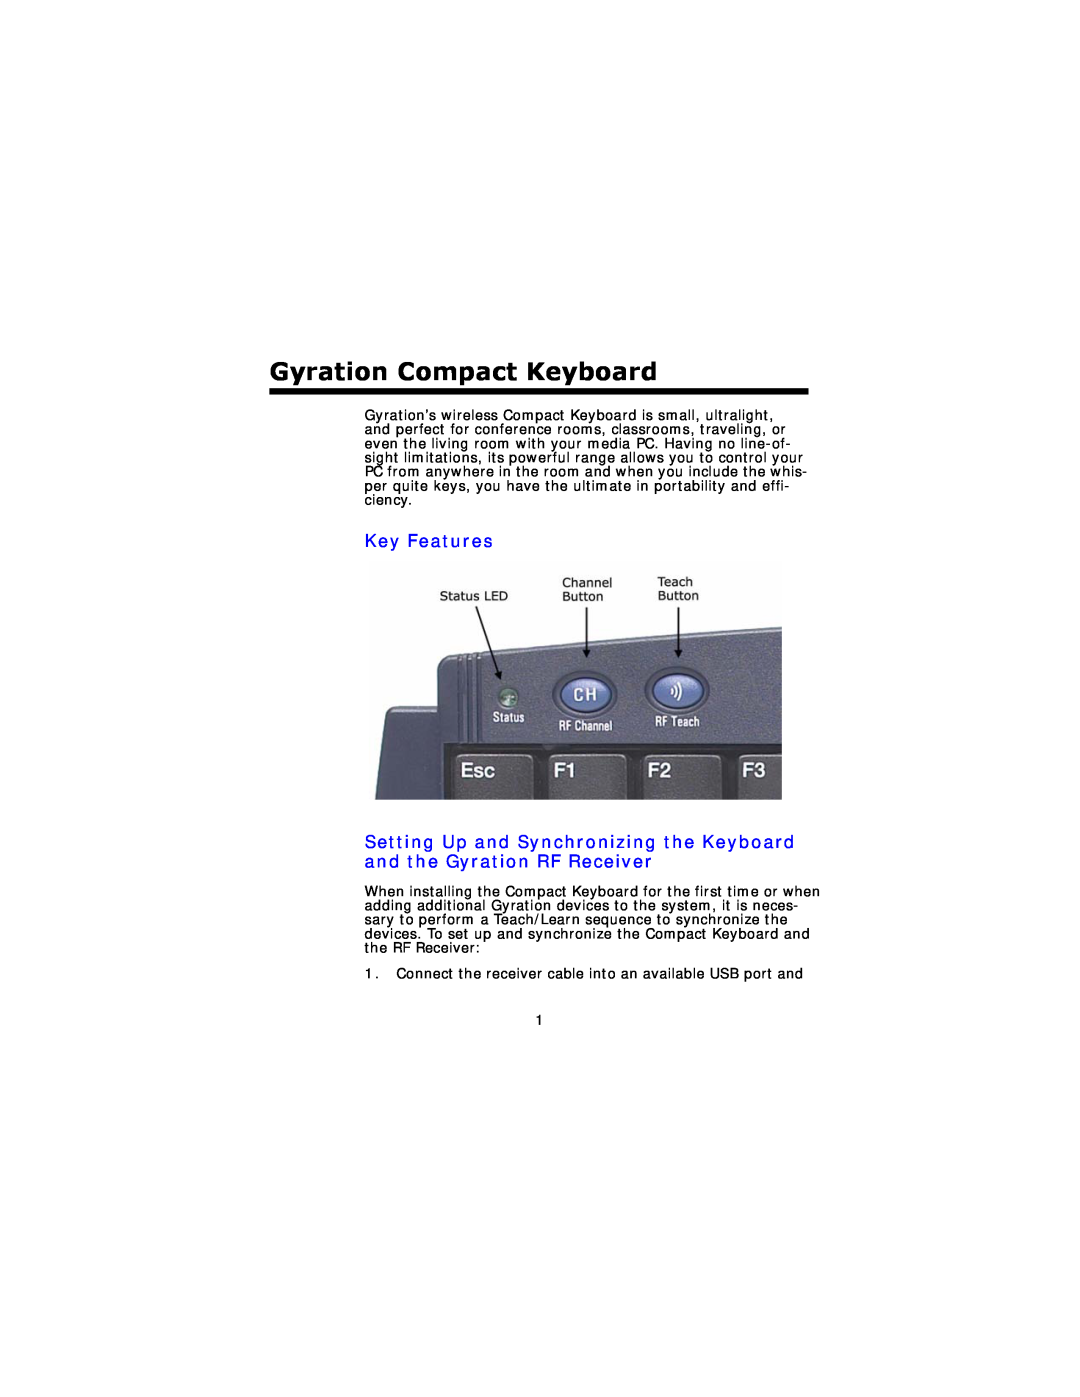 Gyration user manual Key Features, Gyration Compact Keyboard 